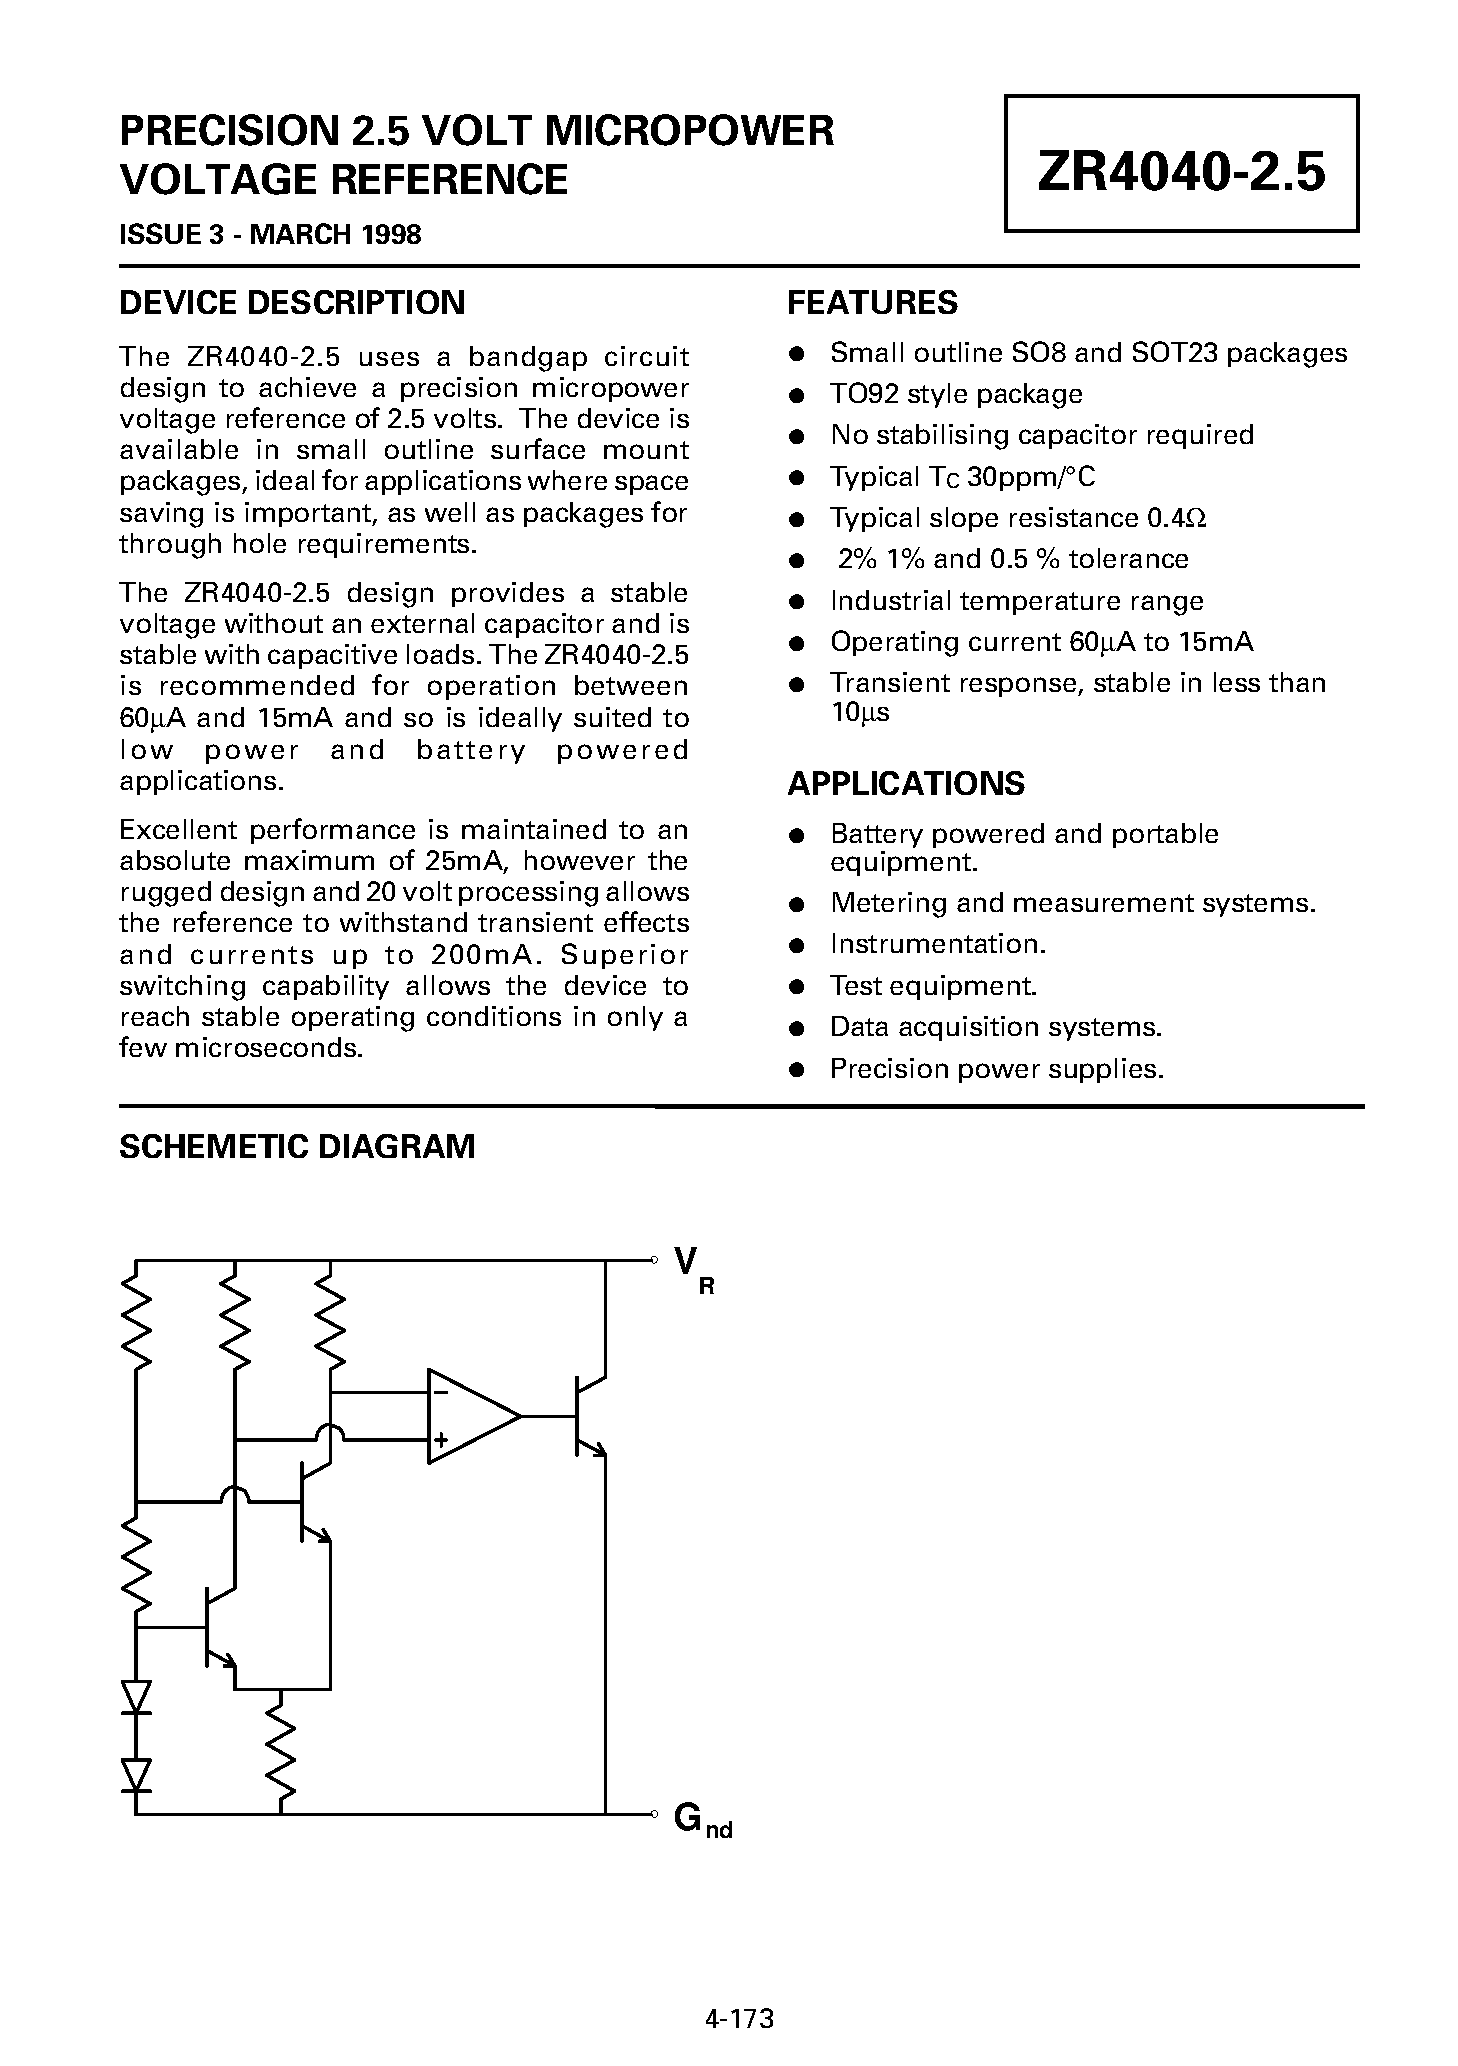 Datasheet ZR40401N825 - PRECISION 2.5 VOLT MICROPOWER VOLTAGE REFERENCE page 1